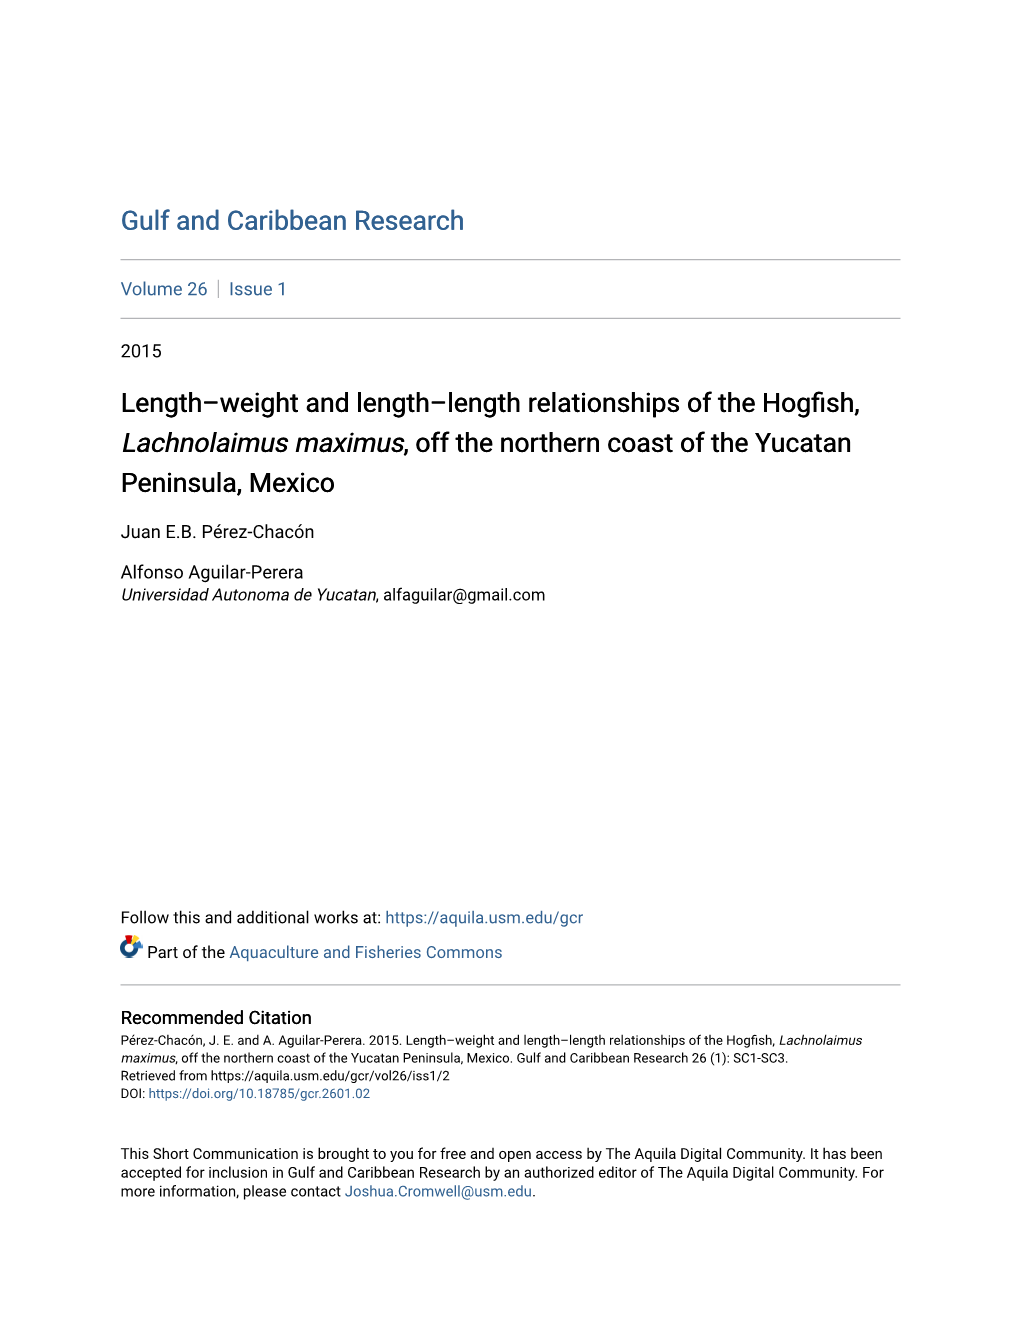 Length–Weight and Length–Length Relationships of the Hogfish, Lachnolaimus Maximus, Off the Northern Coast of the Yucatan Peninsula, Mexico